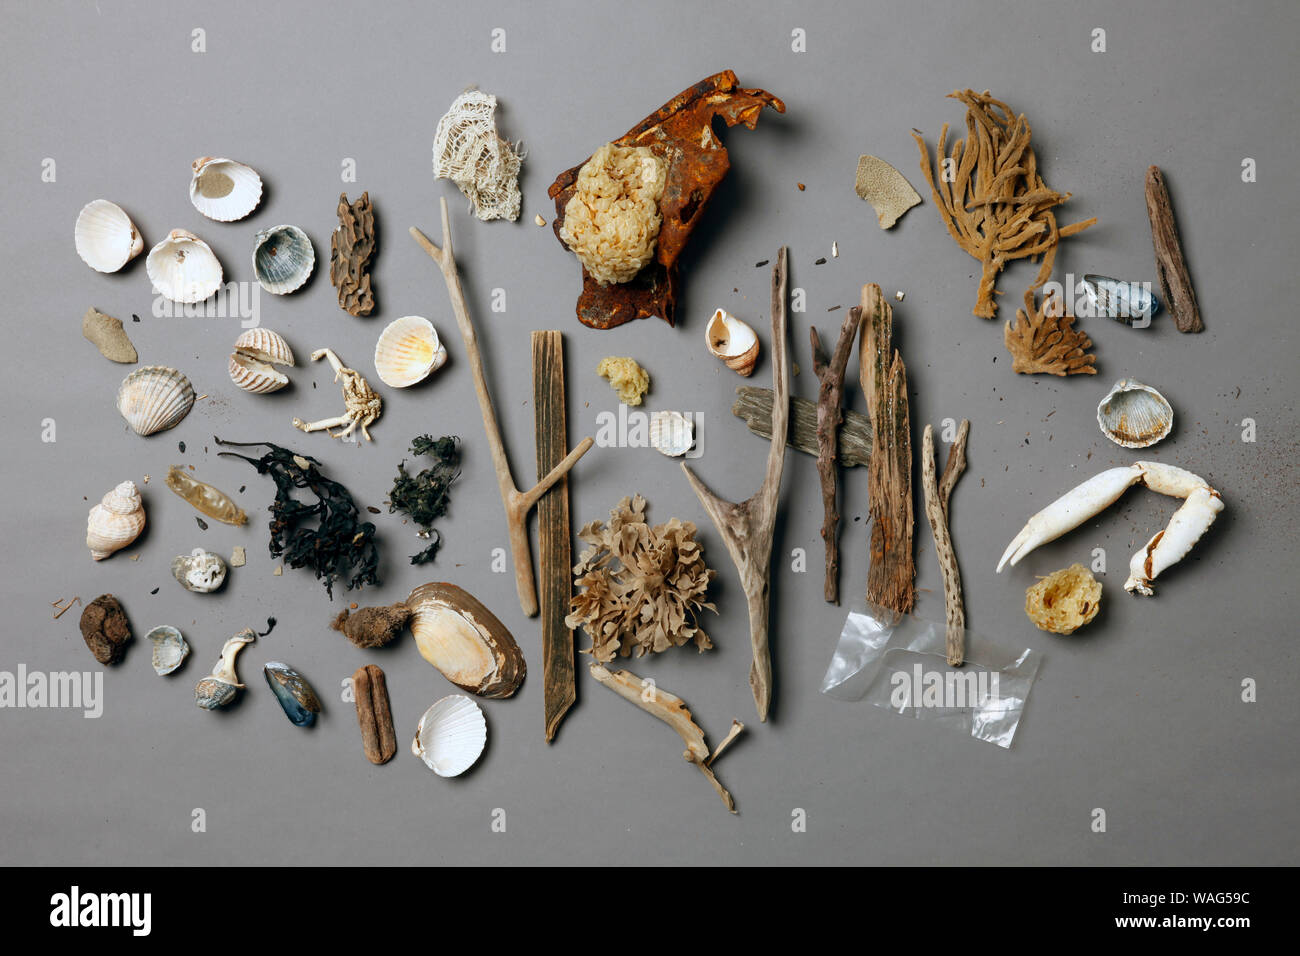 Beach finds including a plastic item. Stock Photo